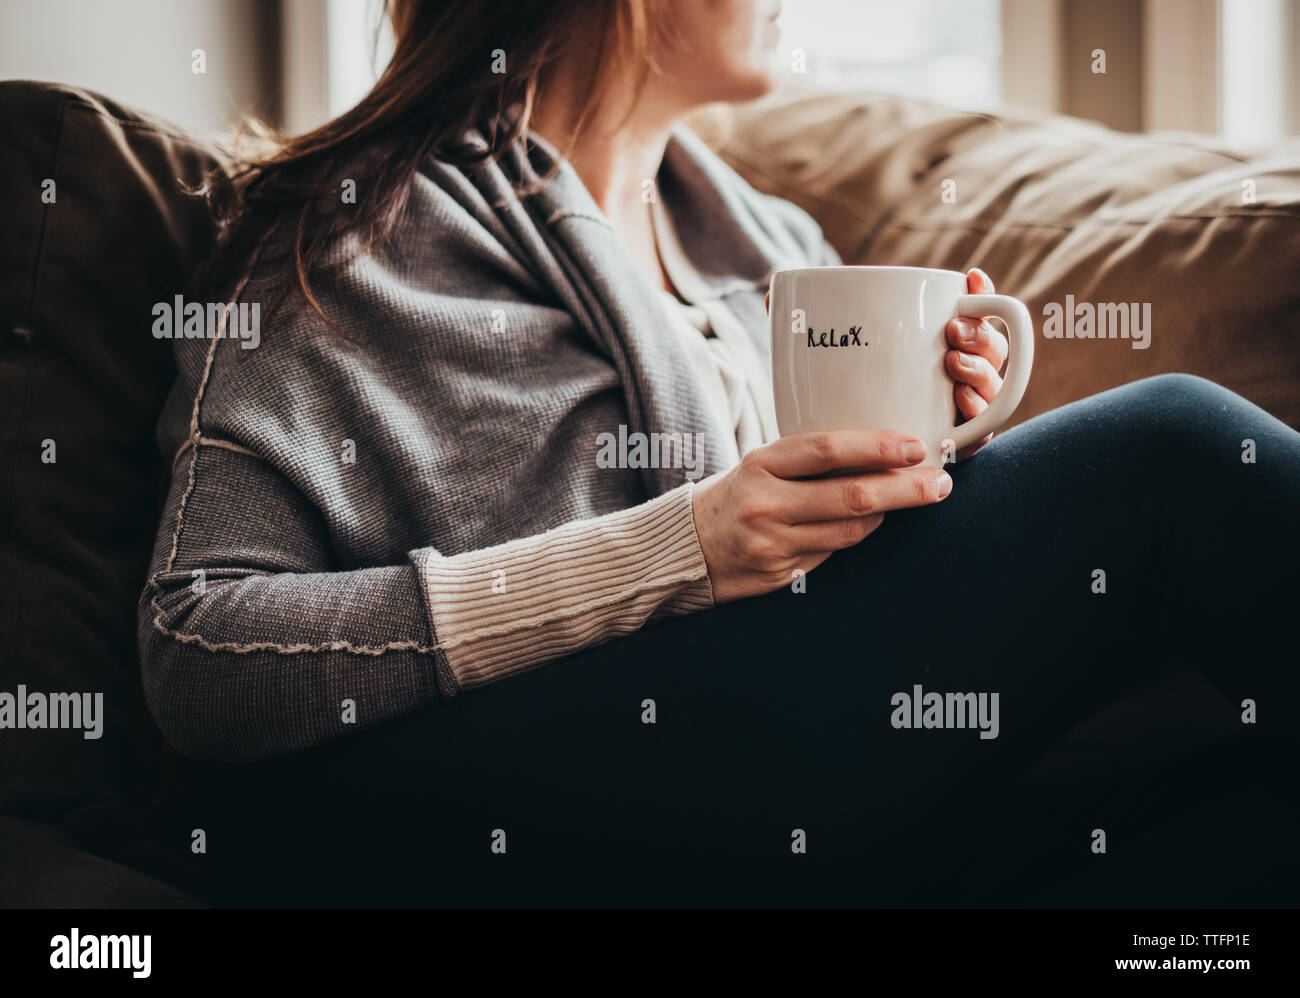 Cropped image of woman holding mug with word relax on it on a couch. Stock Photo